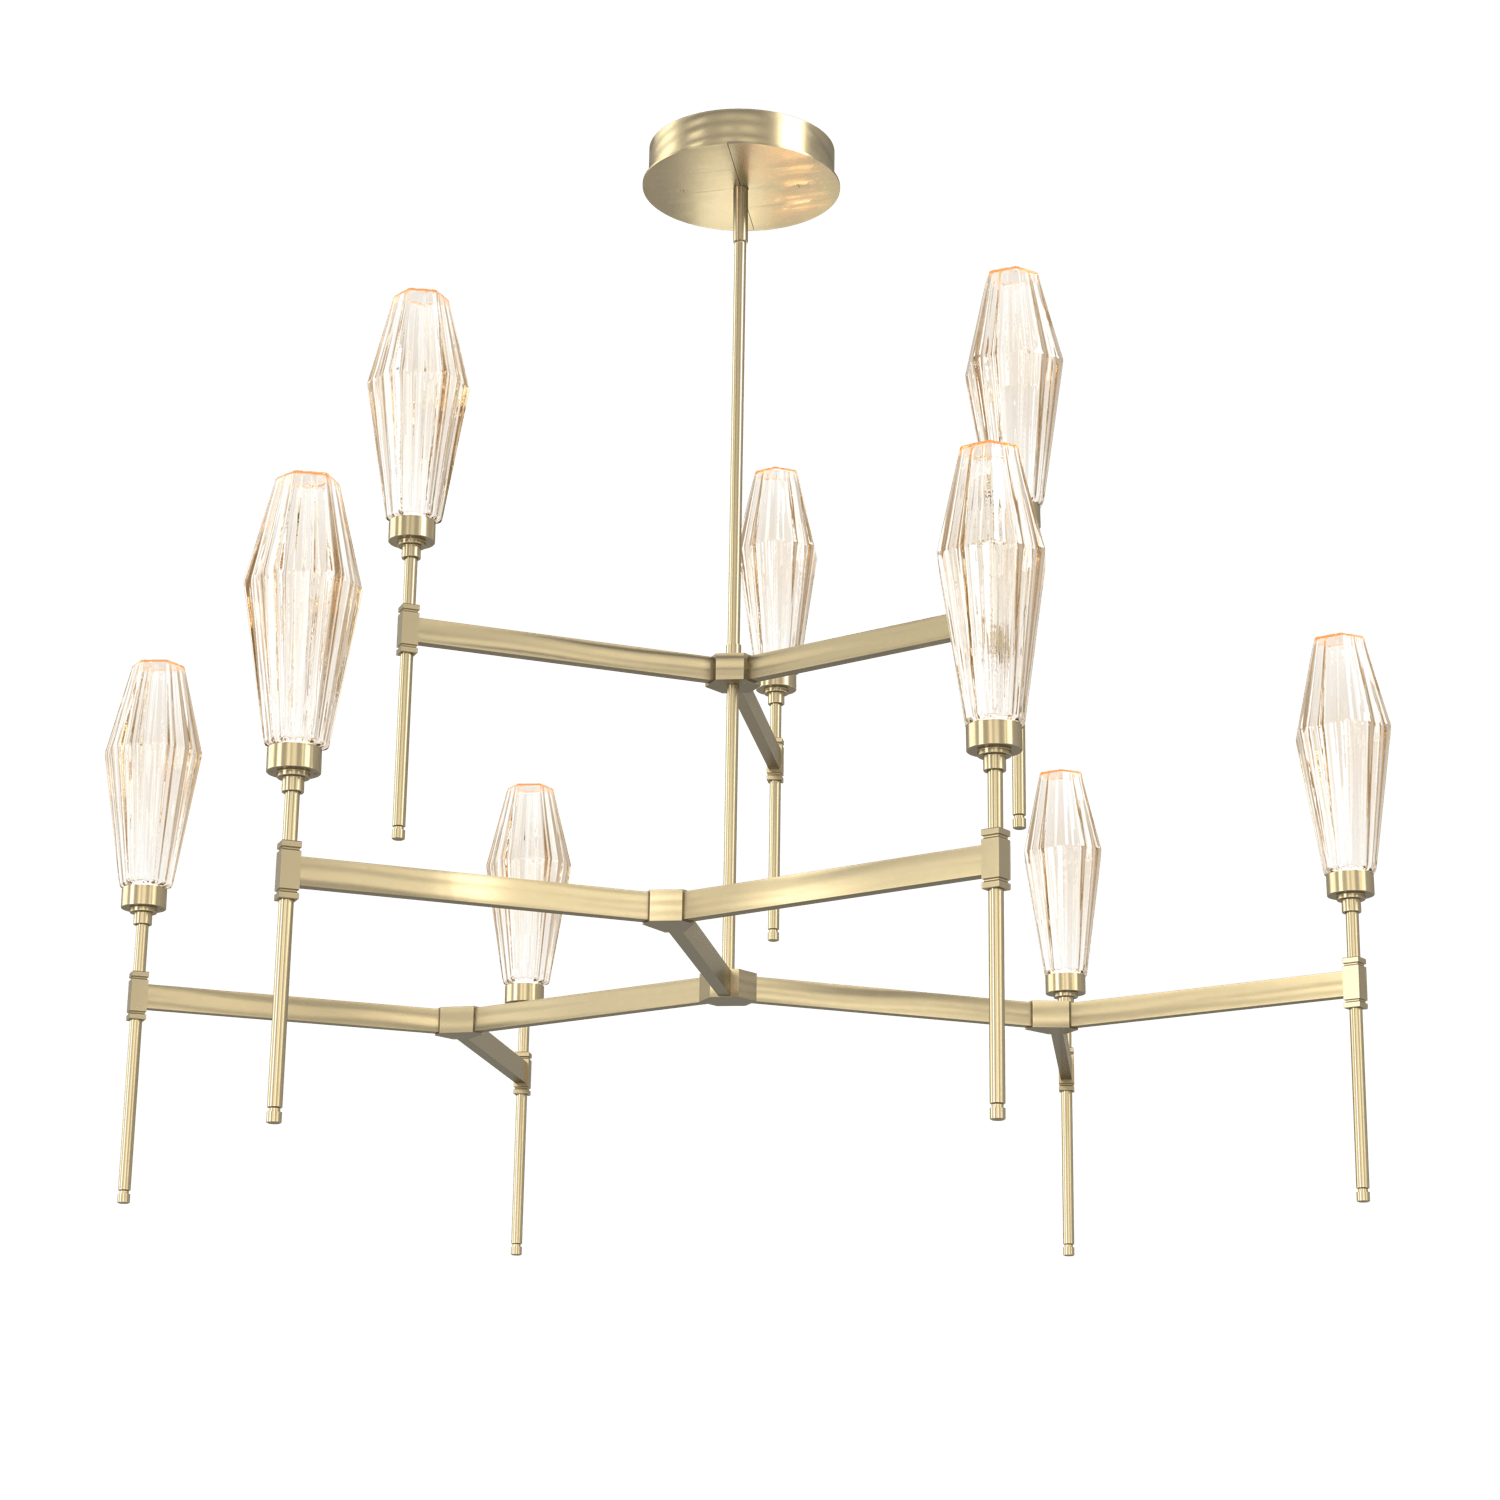 CHB0049-54-HB-RA-Hammerton-Studio-Aalto-54-inch-round-two-tier-belvedere-chandelier-with-heritage-brass-finish-and-optic-ribbed-amber-glass-shades-and-LED-lamping